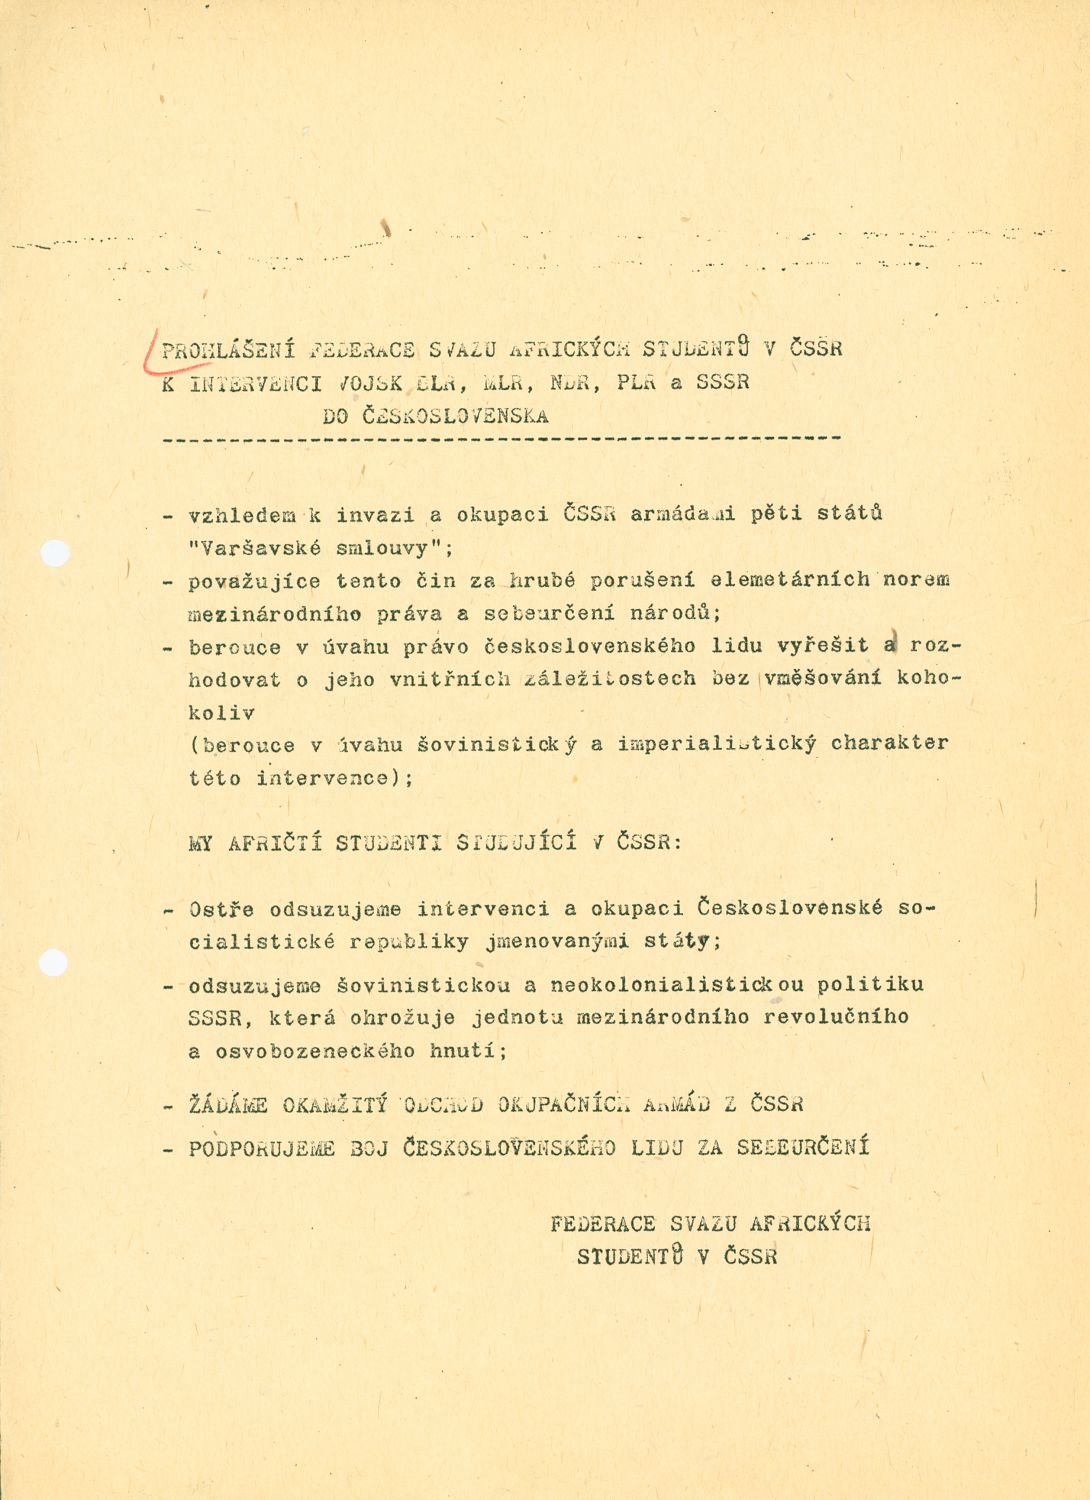 Statement of the African Students' Union in Czechoslovakia